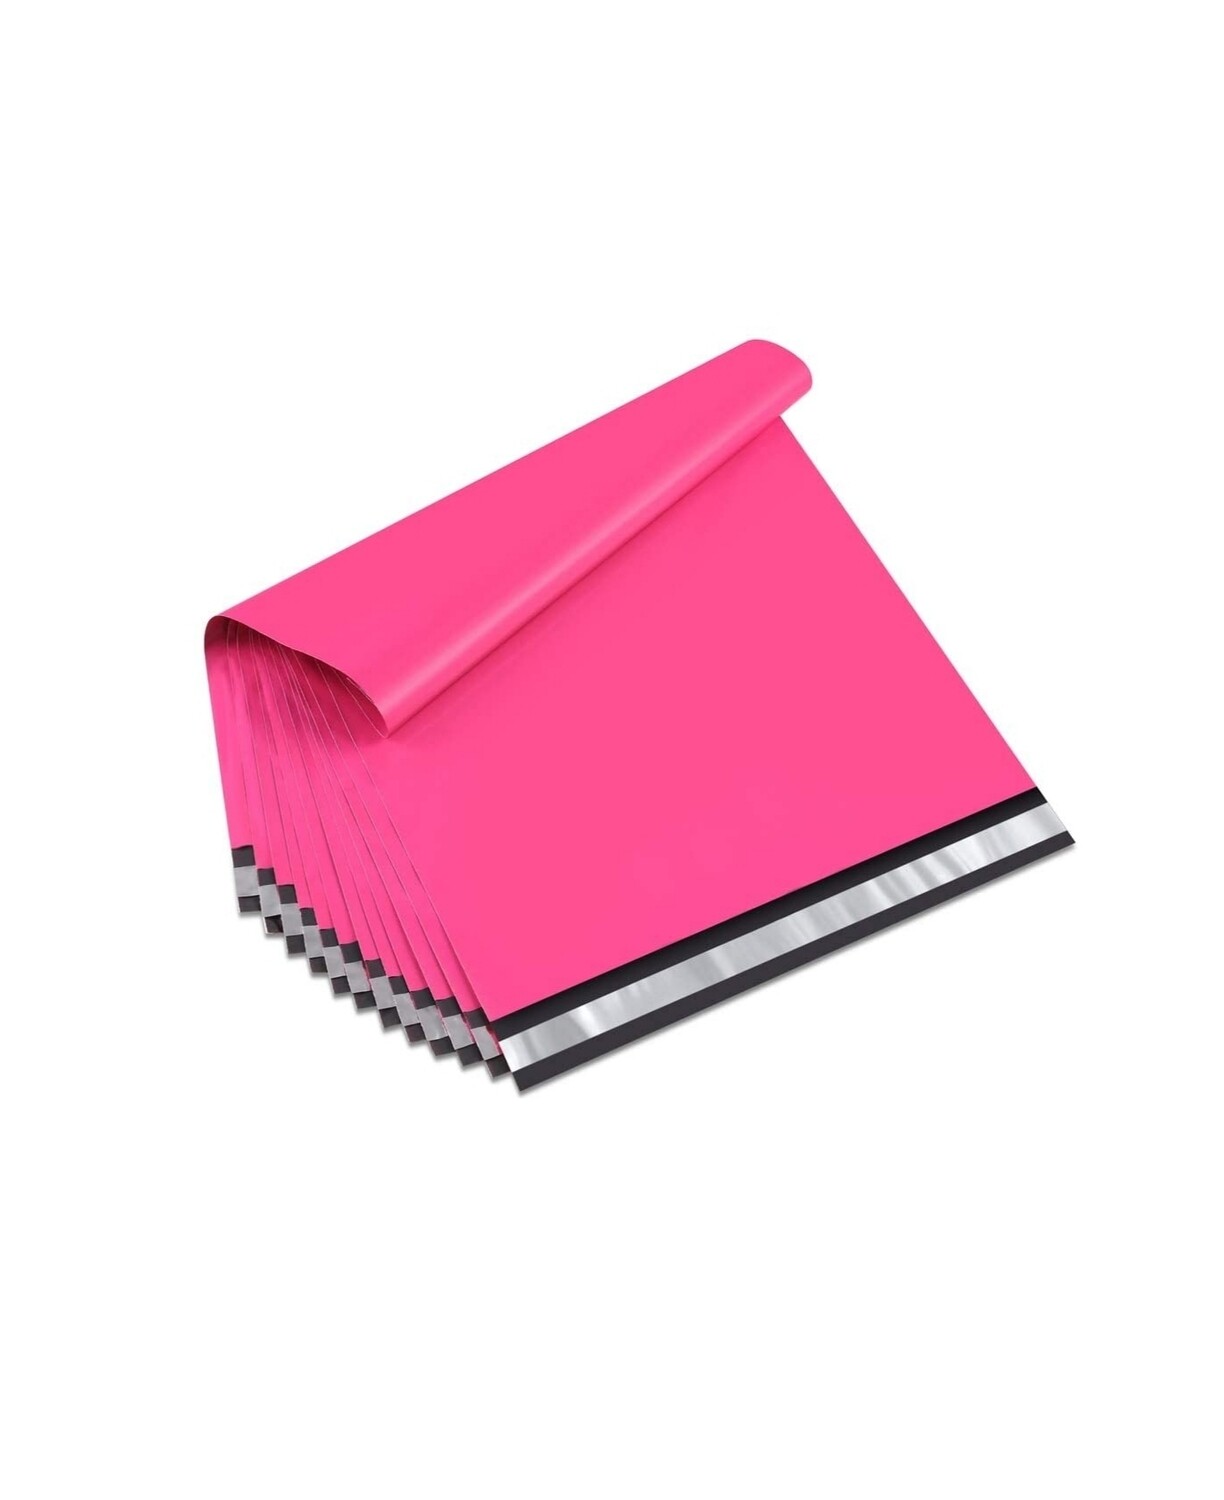 14.5x19 Inch Hot Pink Poly Mailers 